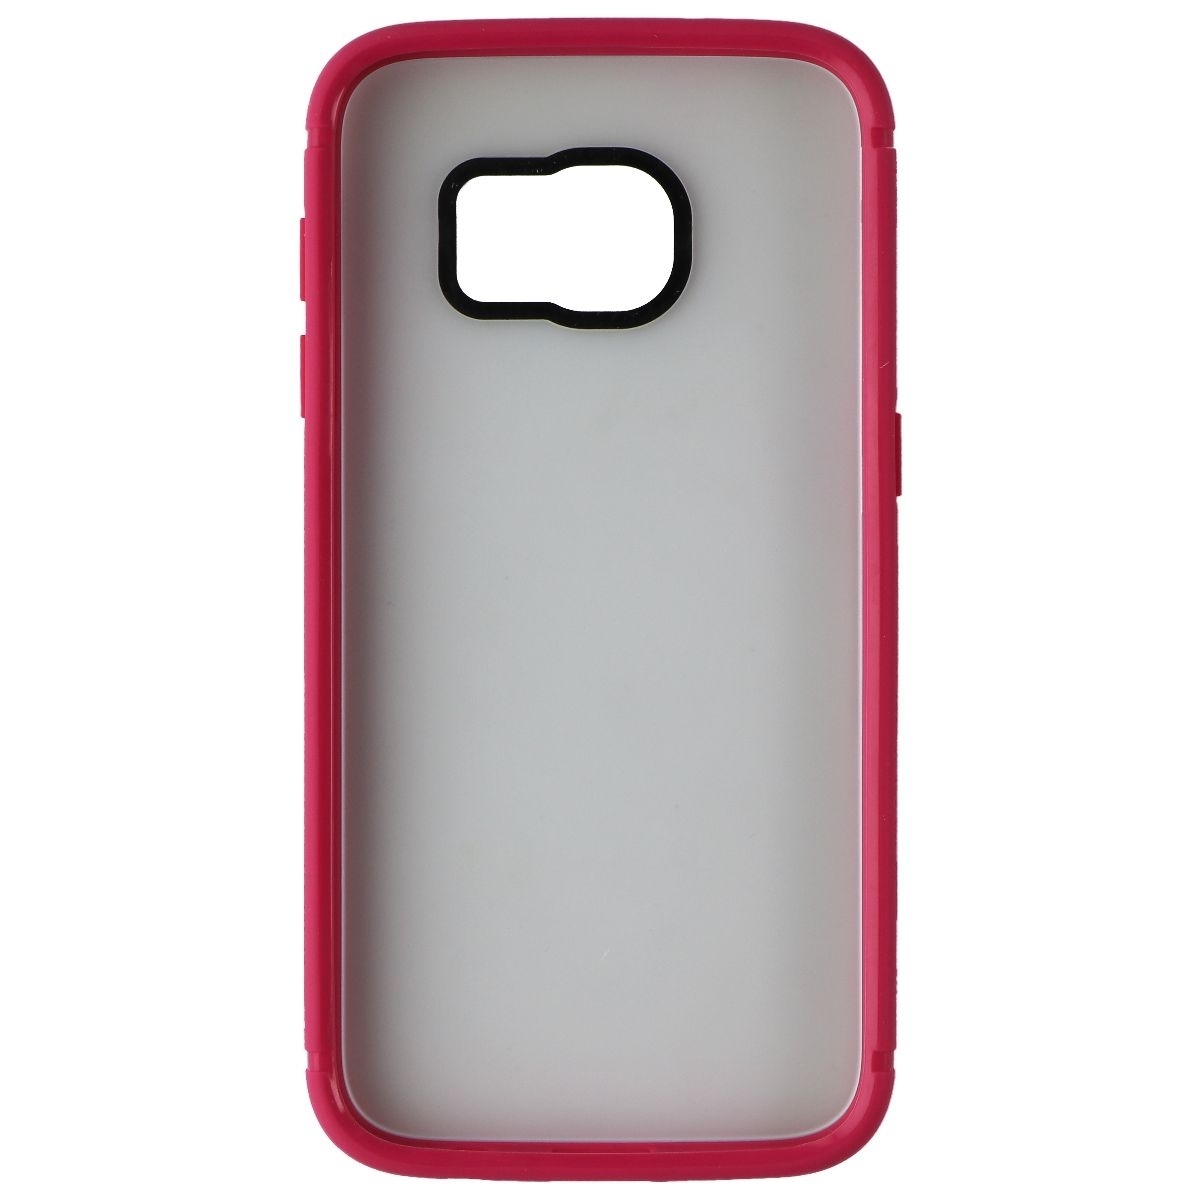 BodyGuardz Contact Series Hard Hybrid Case For Samsung Galaxy S7 - Pink/Clear (Refurbished)